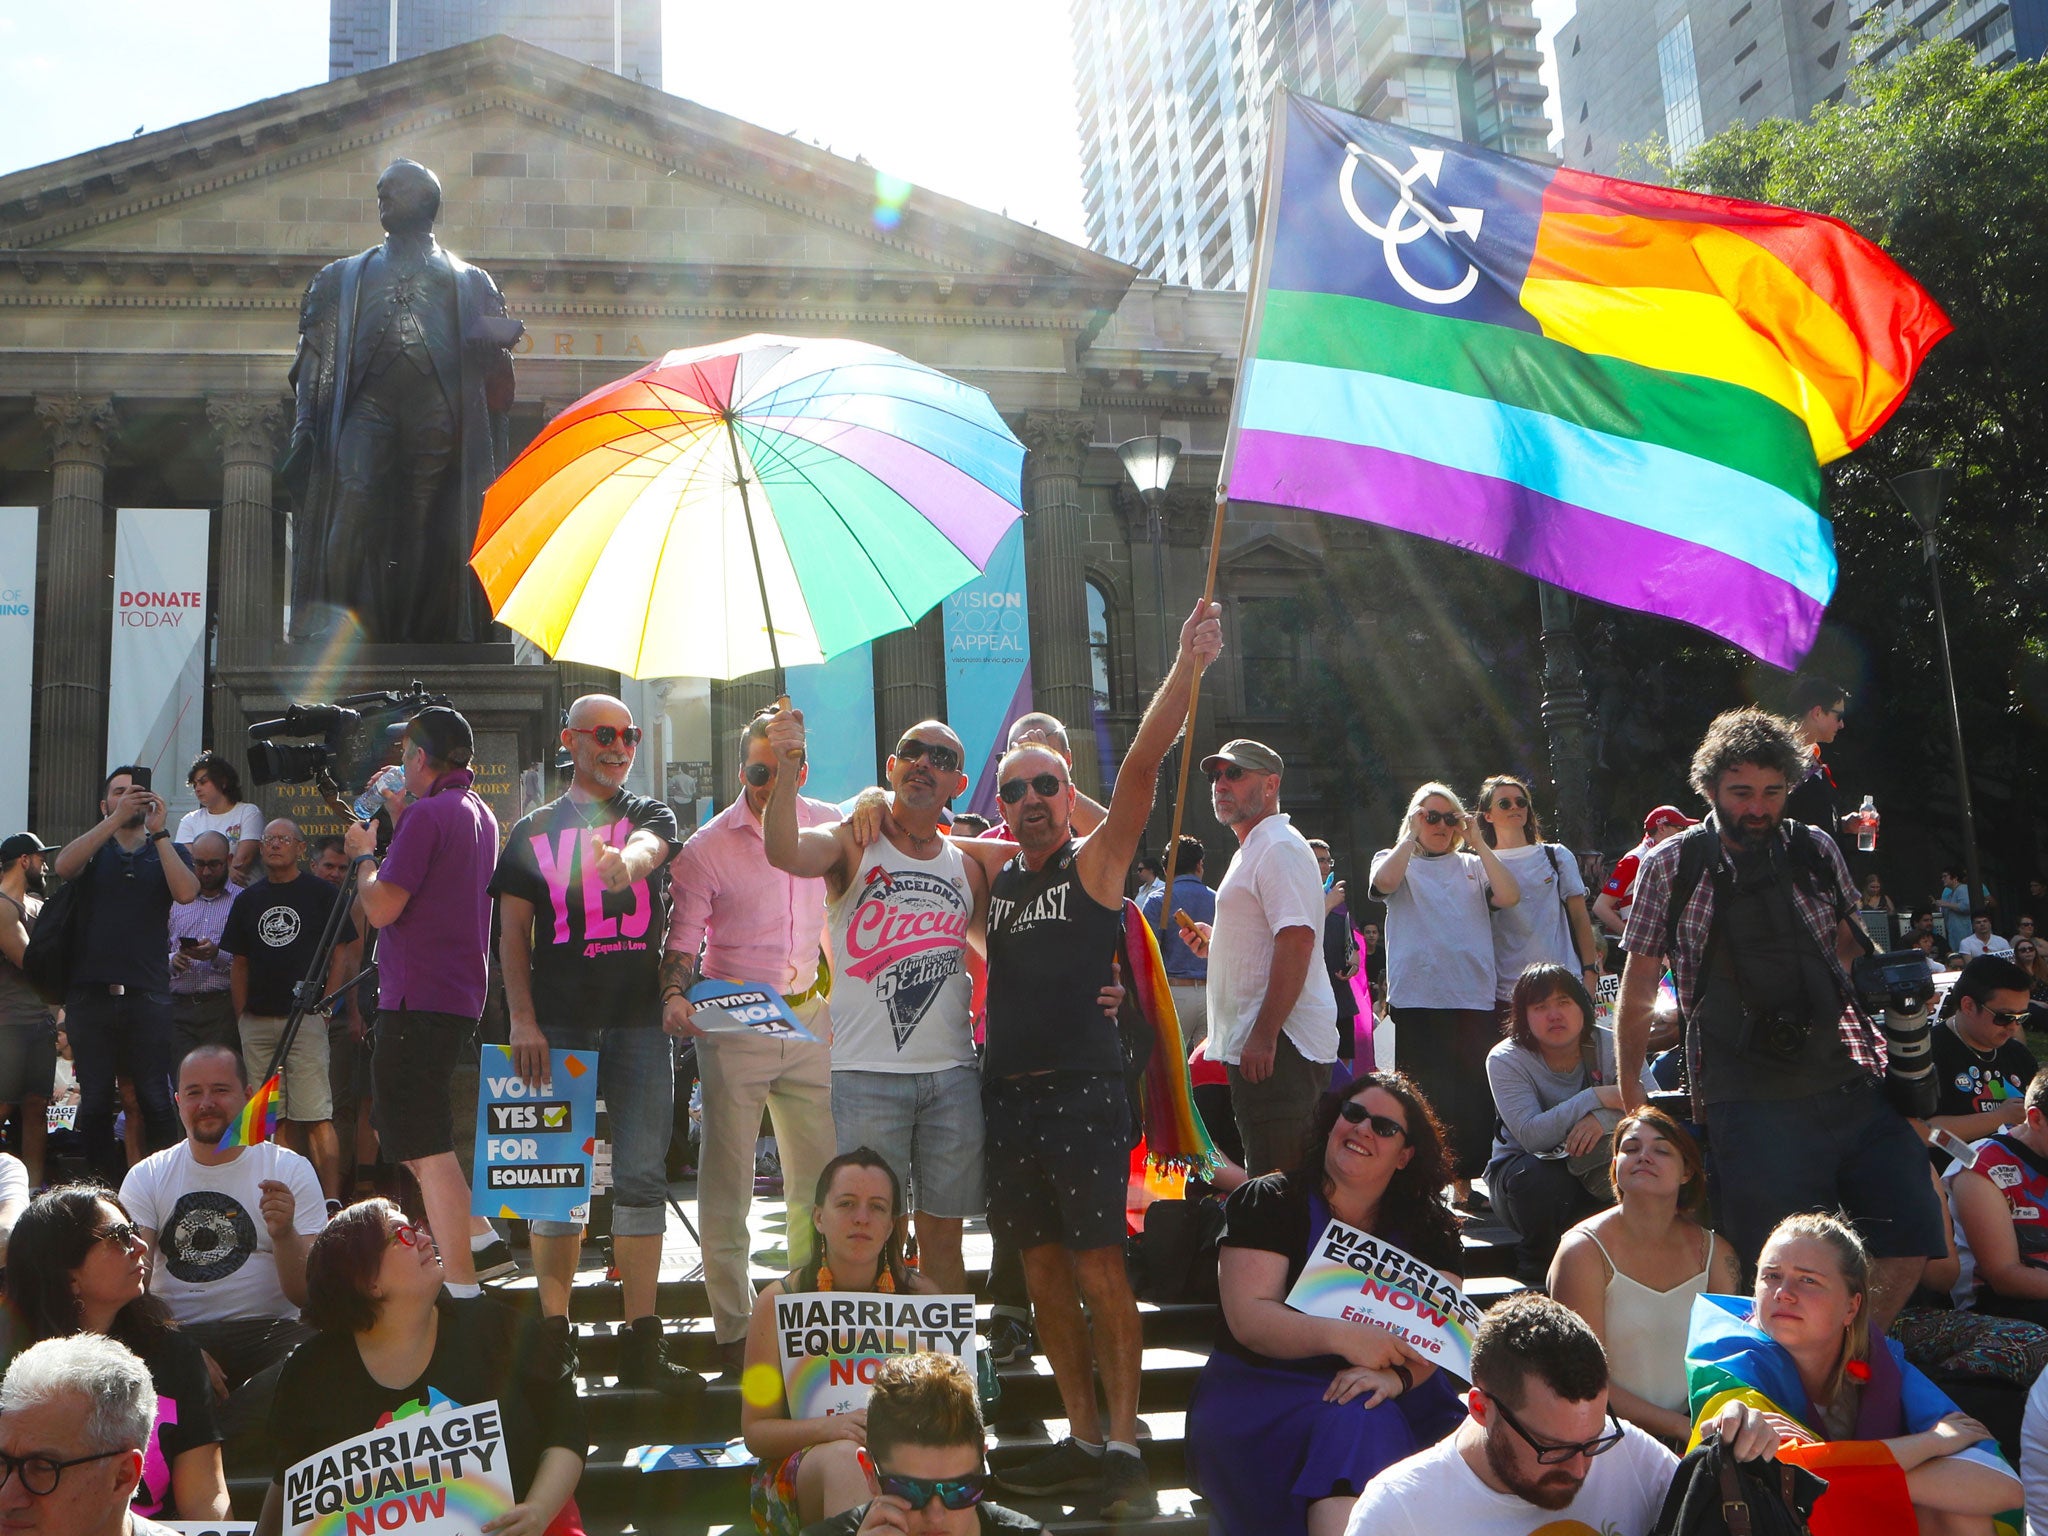 The majority of Australians support the country becoming the 26th nation to legalise same-sex marriage, including supporters here in Melbourne